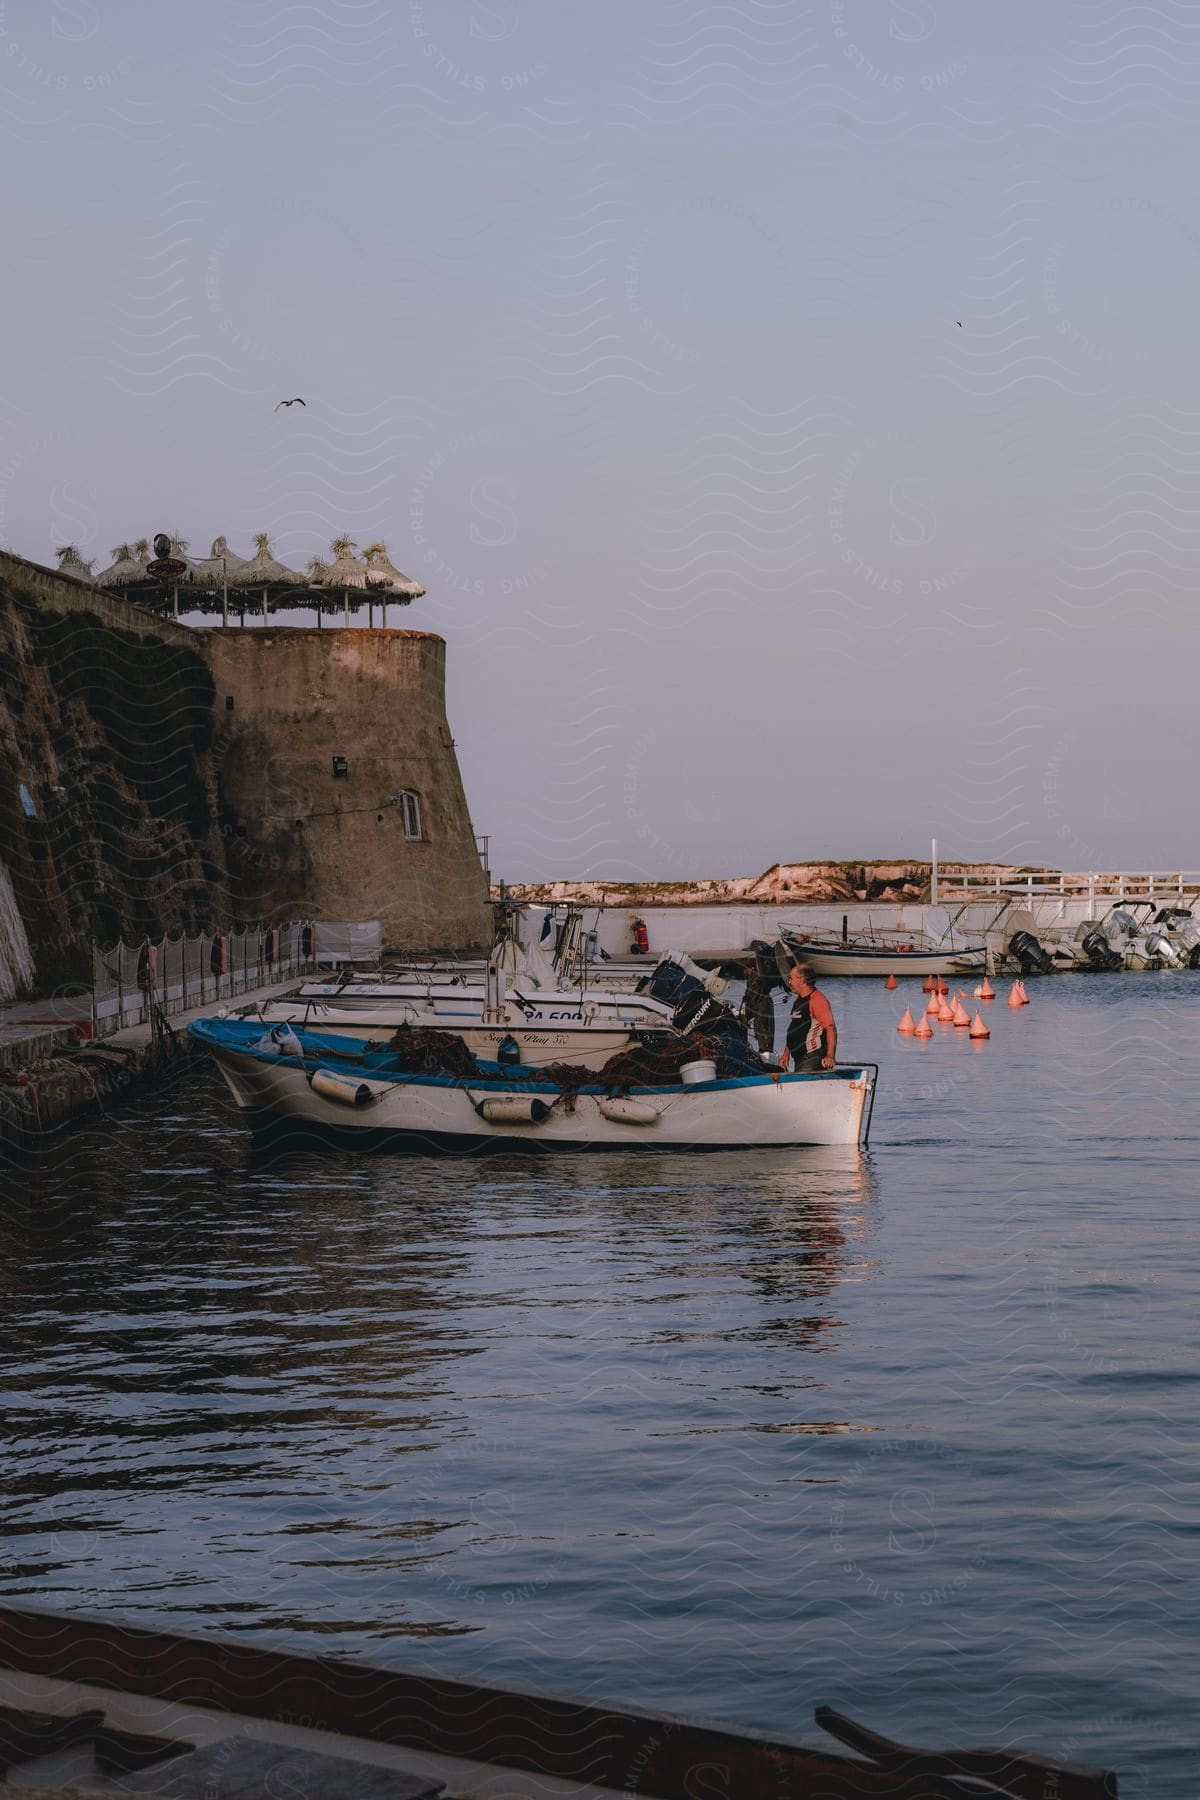 A fisherman working on a small boat moored at a harbor with a large cliff and a structure on top, under a pink sky.